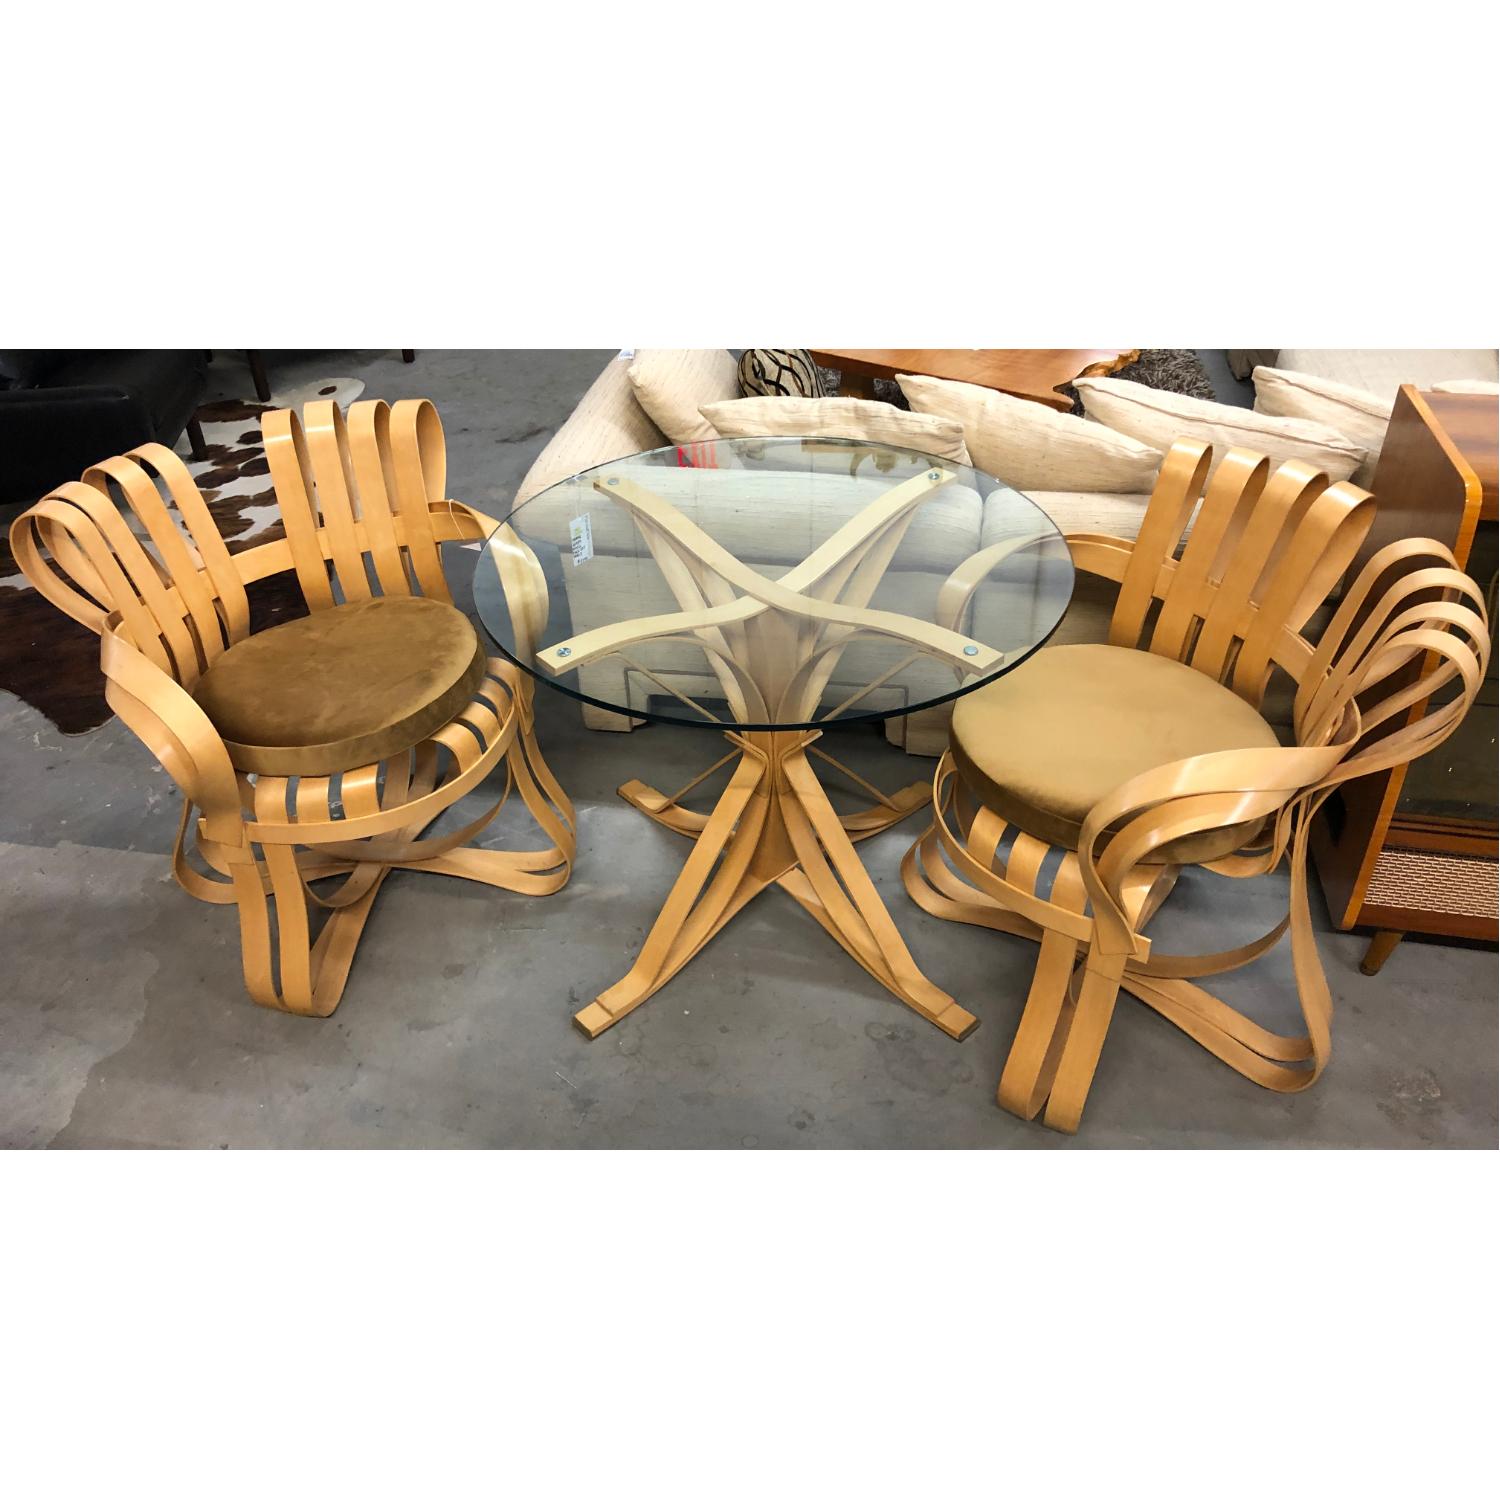 Maple Pair of Frank Gehry for Knoll Cross Check Chairs